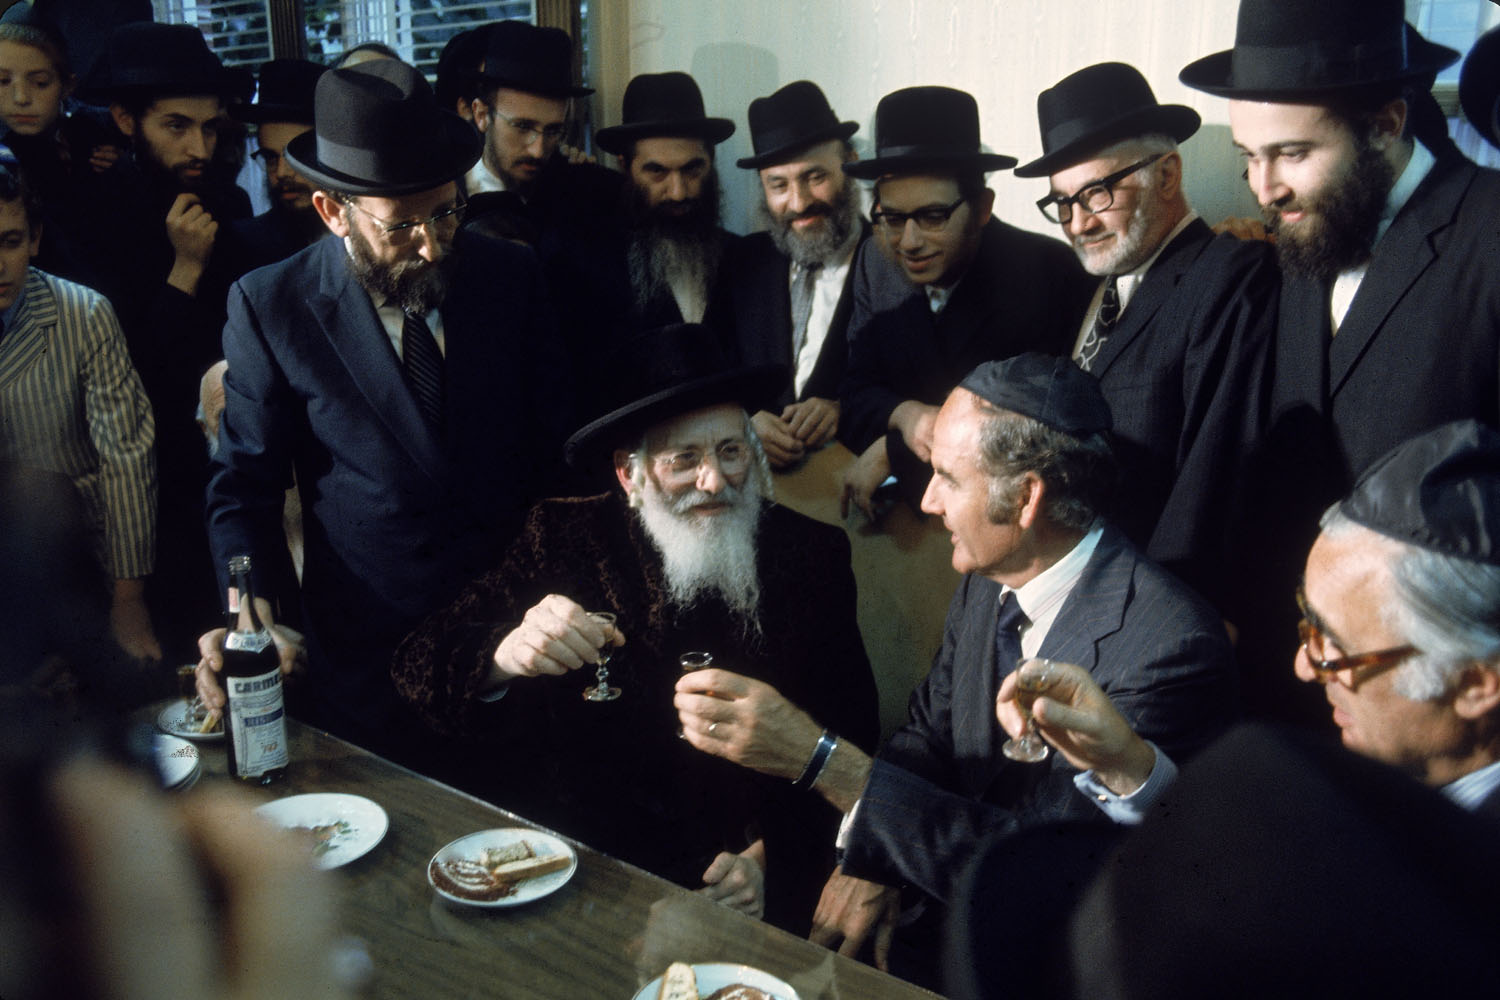 Democratic Presidential candidate George McGovern (seated, 2R) shares a toast with a group of Orthodox Jews while on the campaign trail.